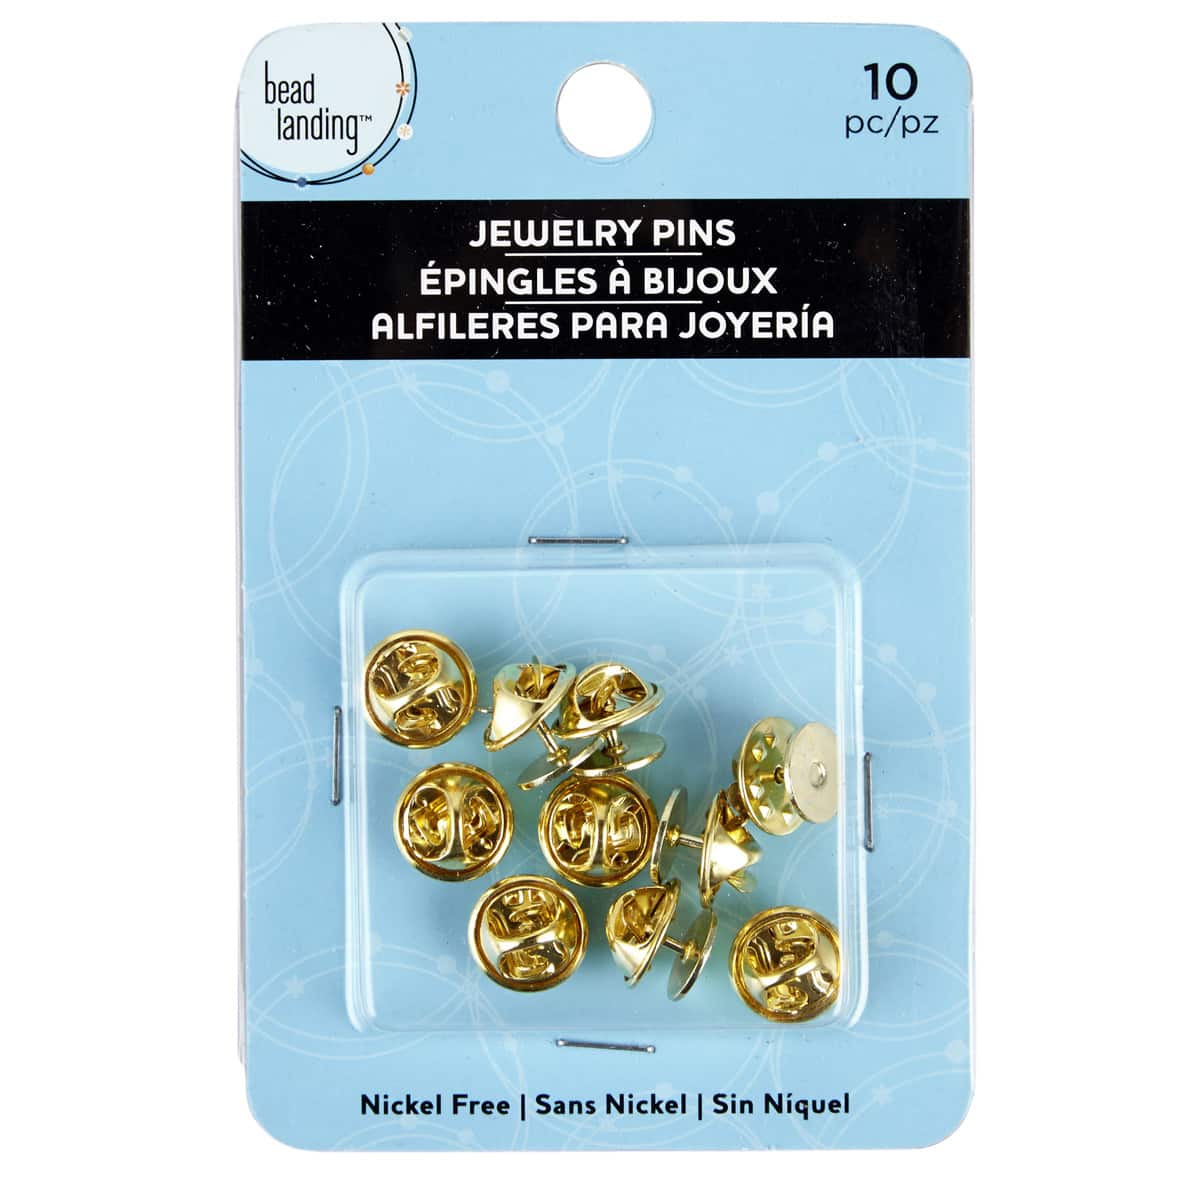 nice quality butterfly clutch pin backings